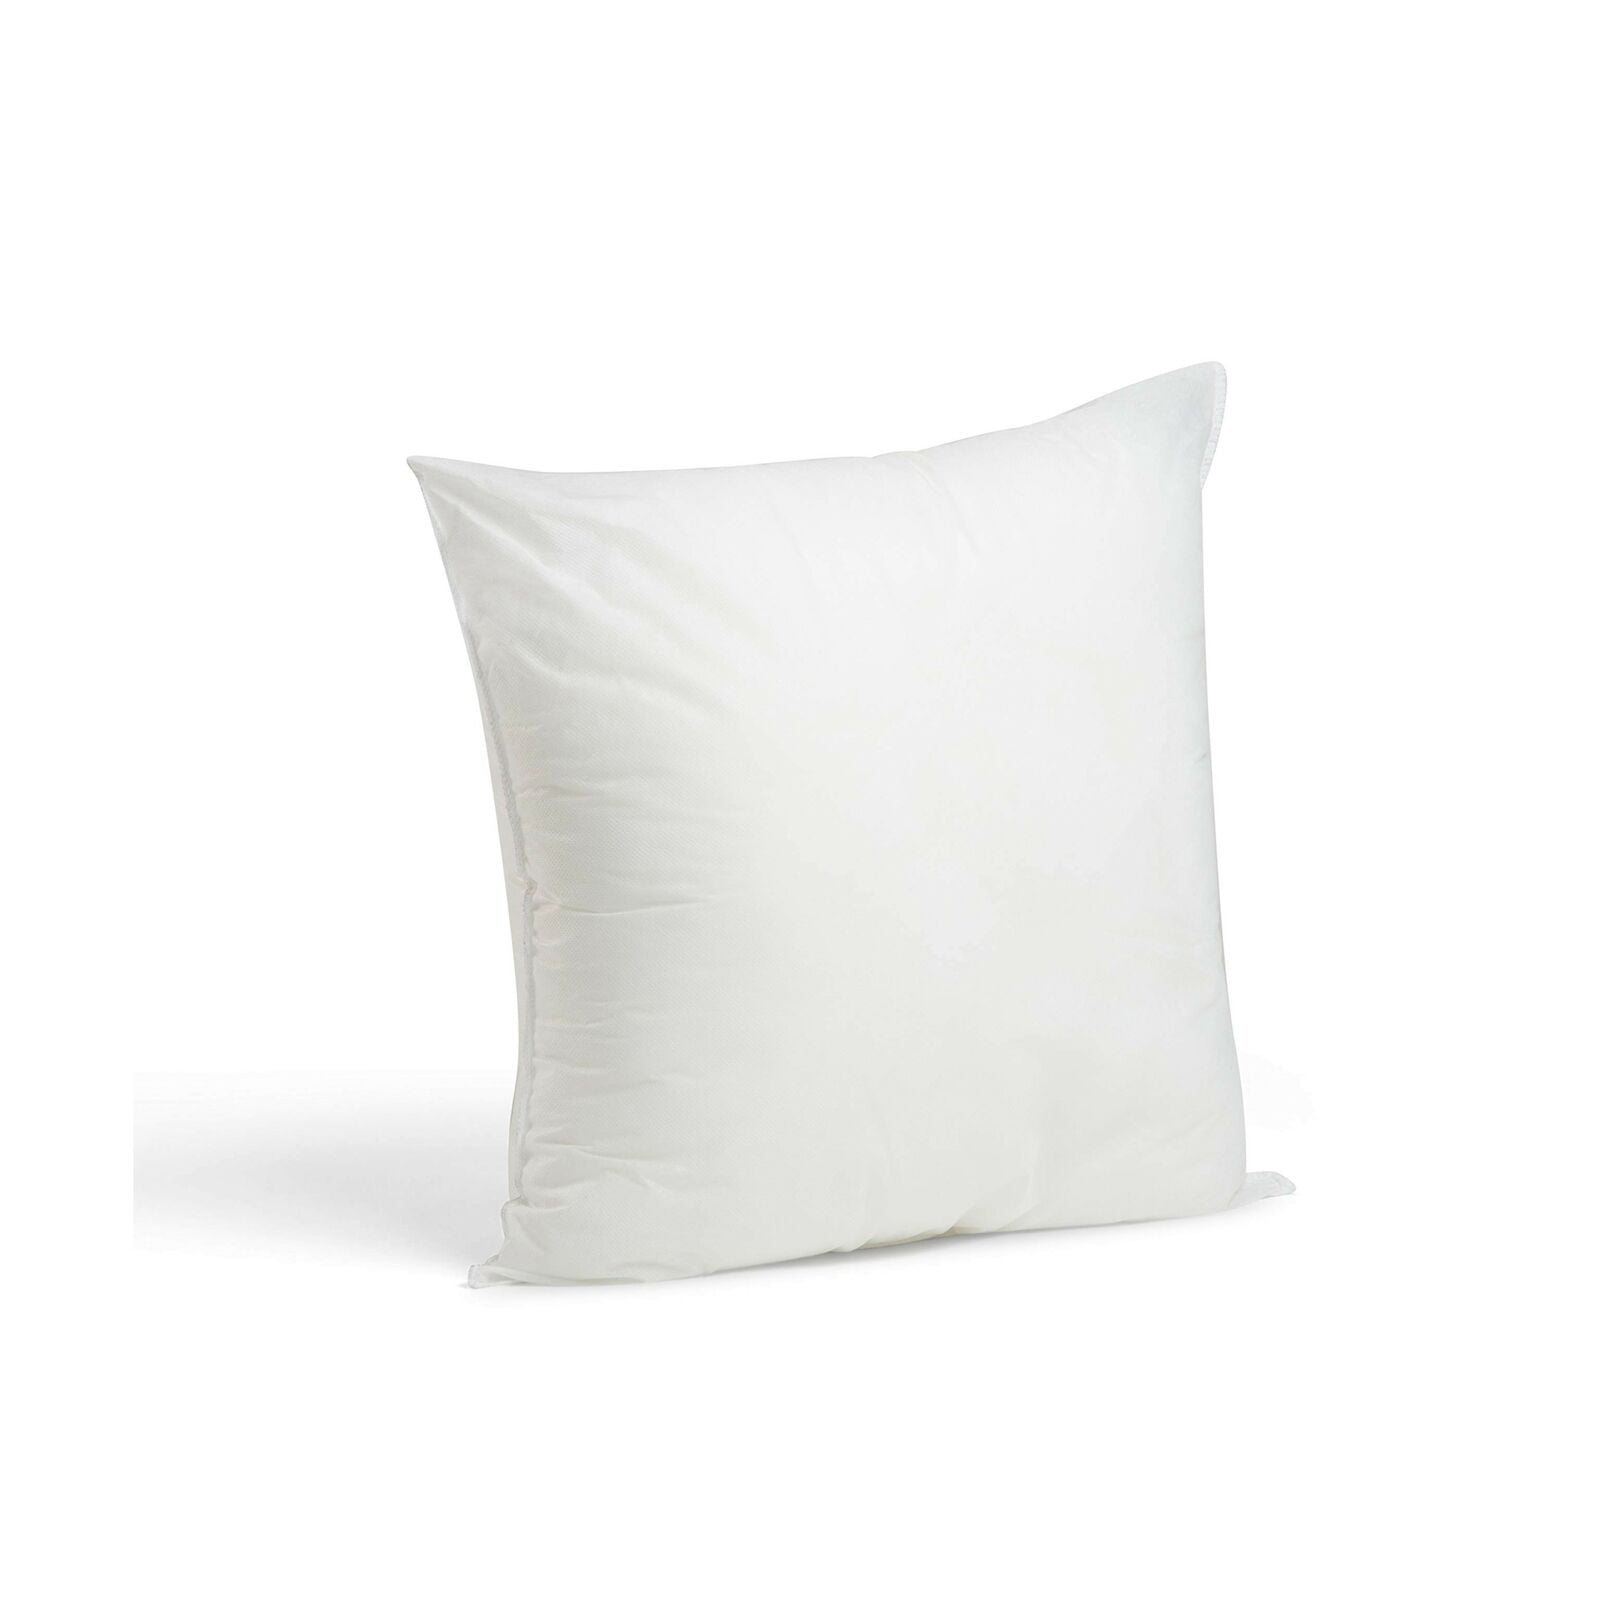 Details about   Foamily Premium Hypoallergenic Stuffer Pillow Insert Sham Square Form Polyester, 